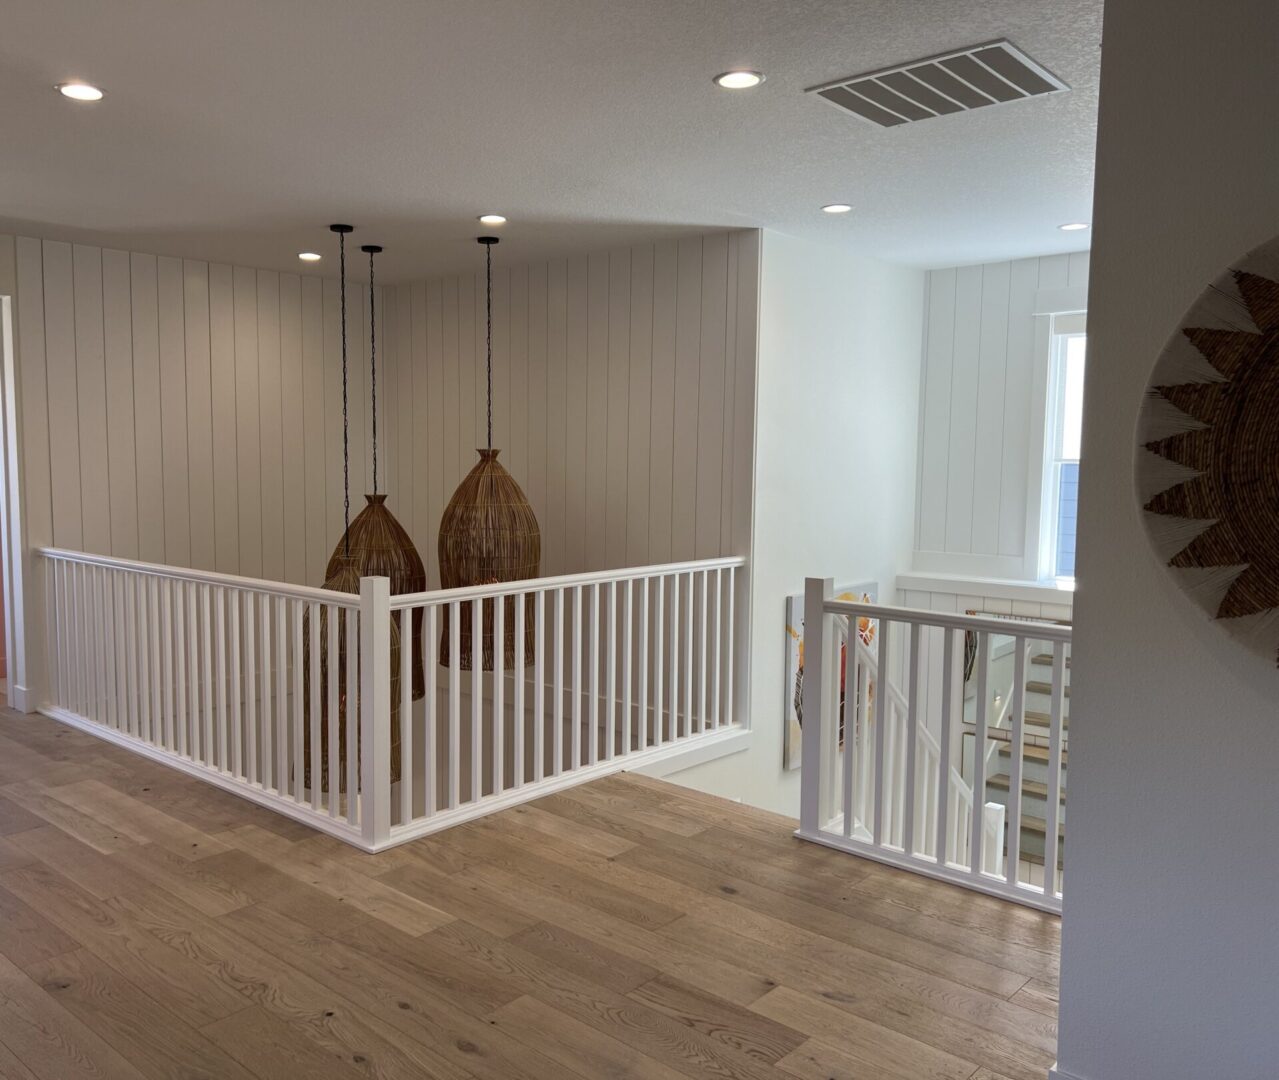 A room with two white railing and wooden floors.